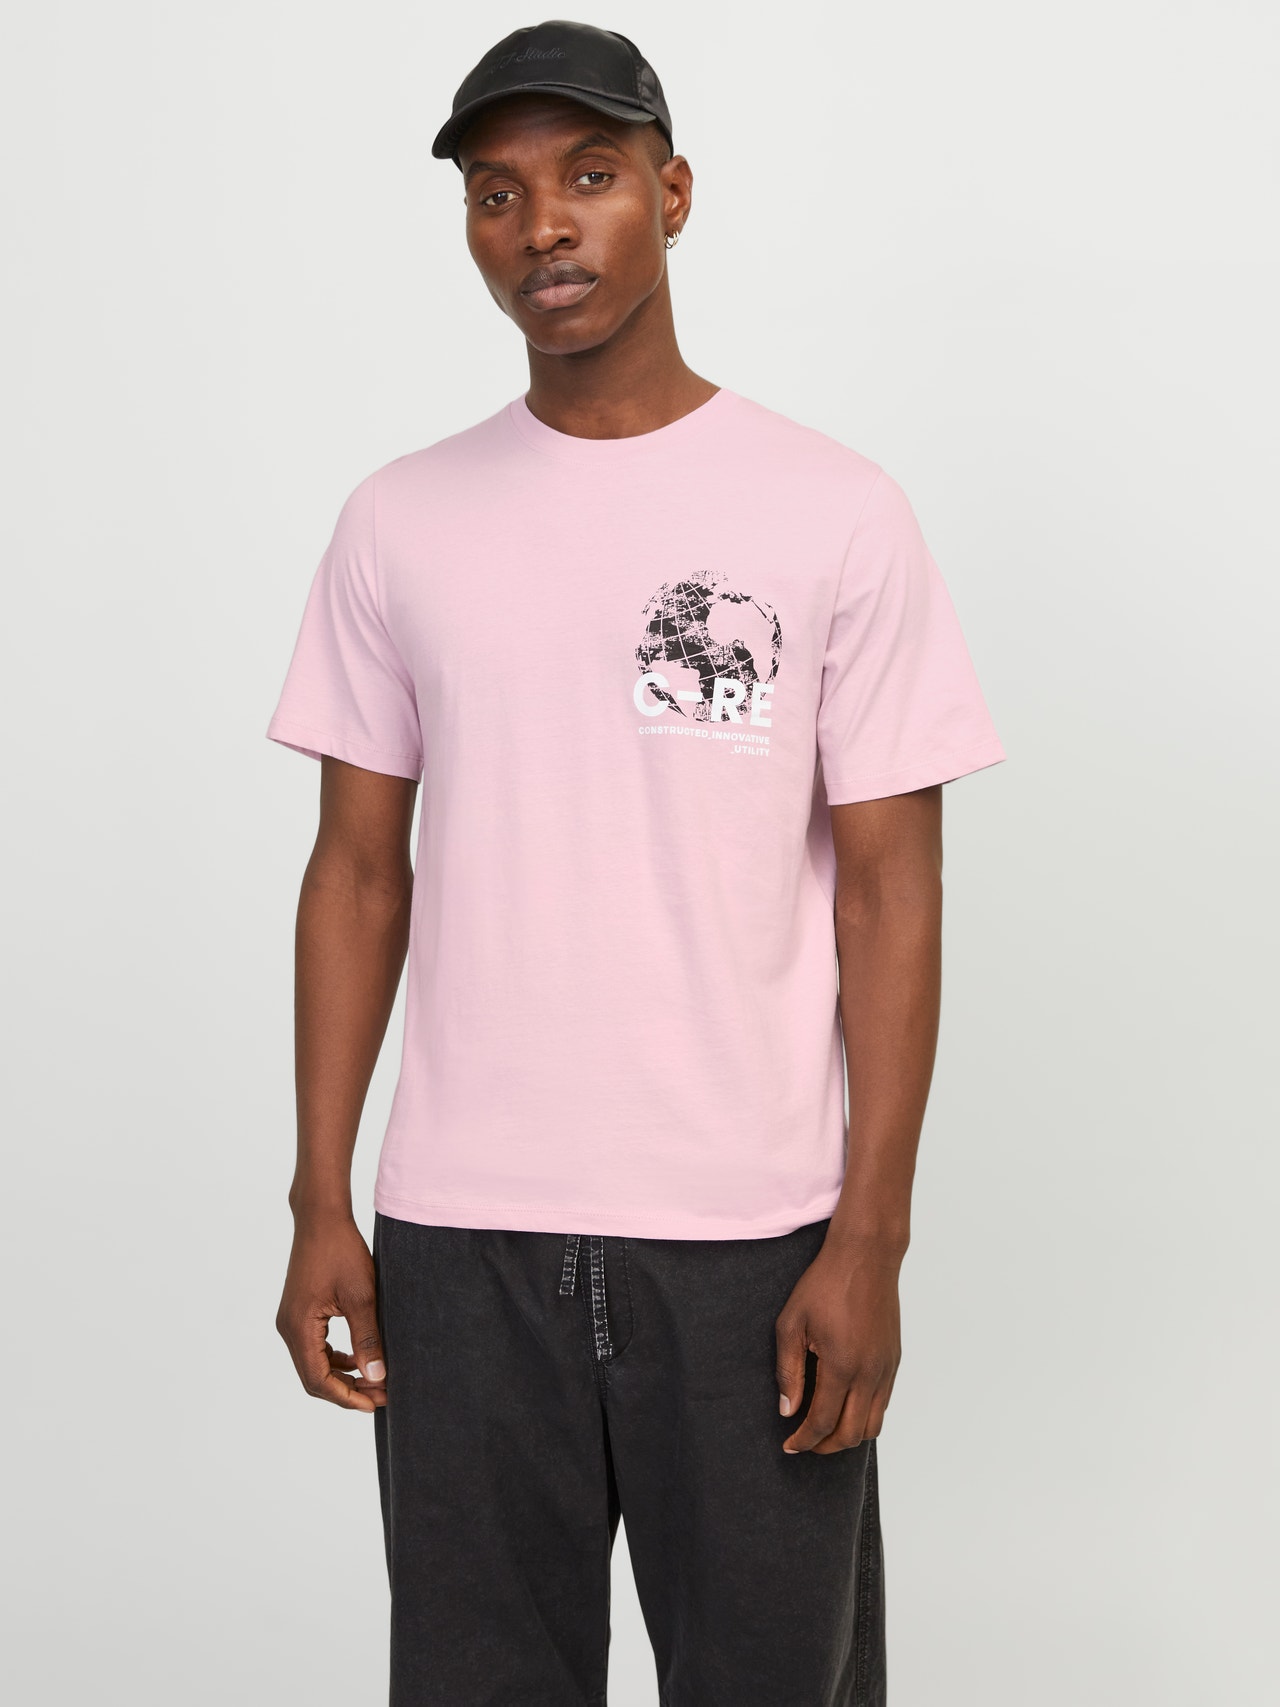 Jack & Jones Printed Crew neck T-shirt -Winsome Orchid - 12255027